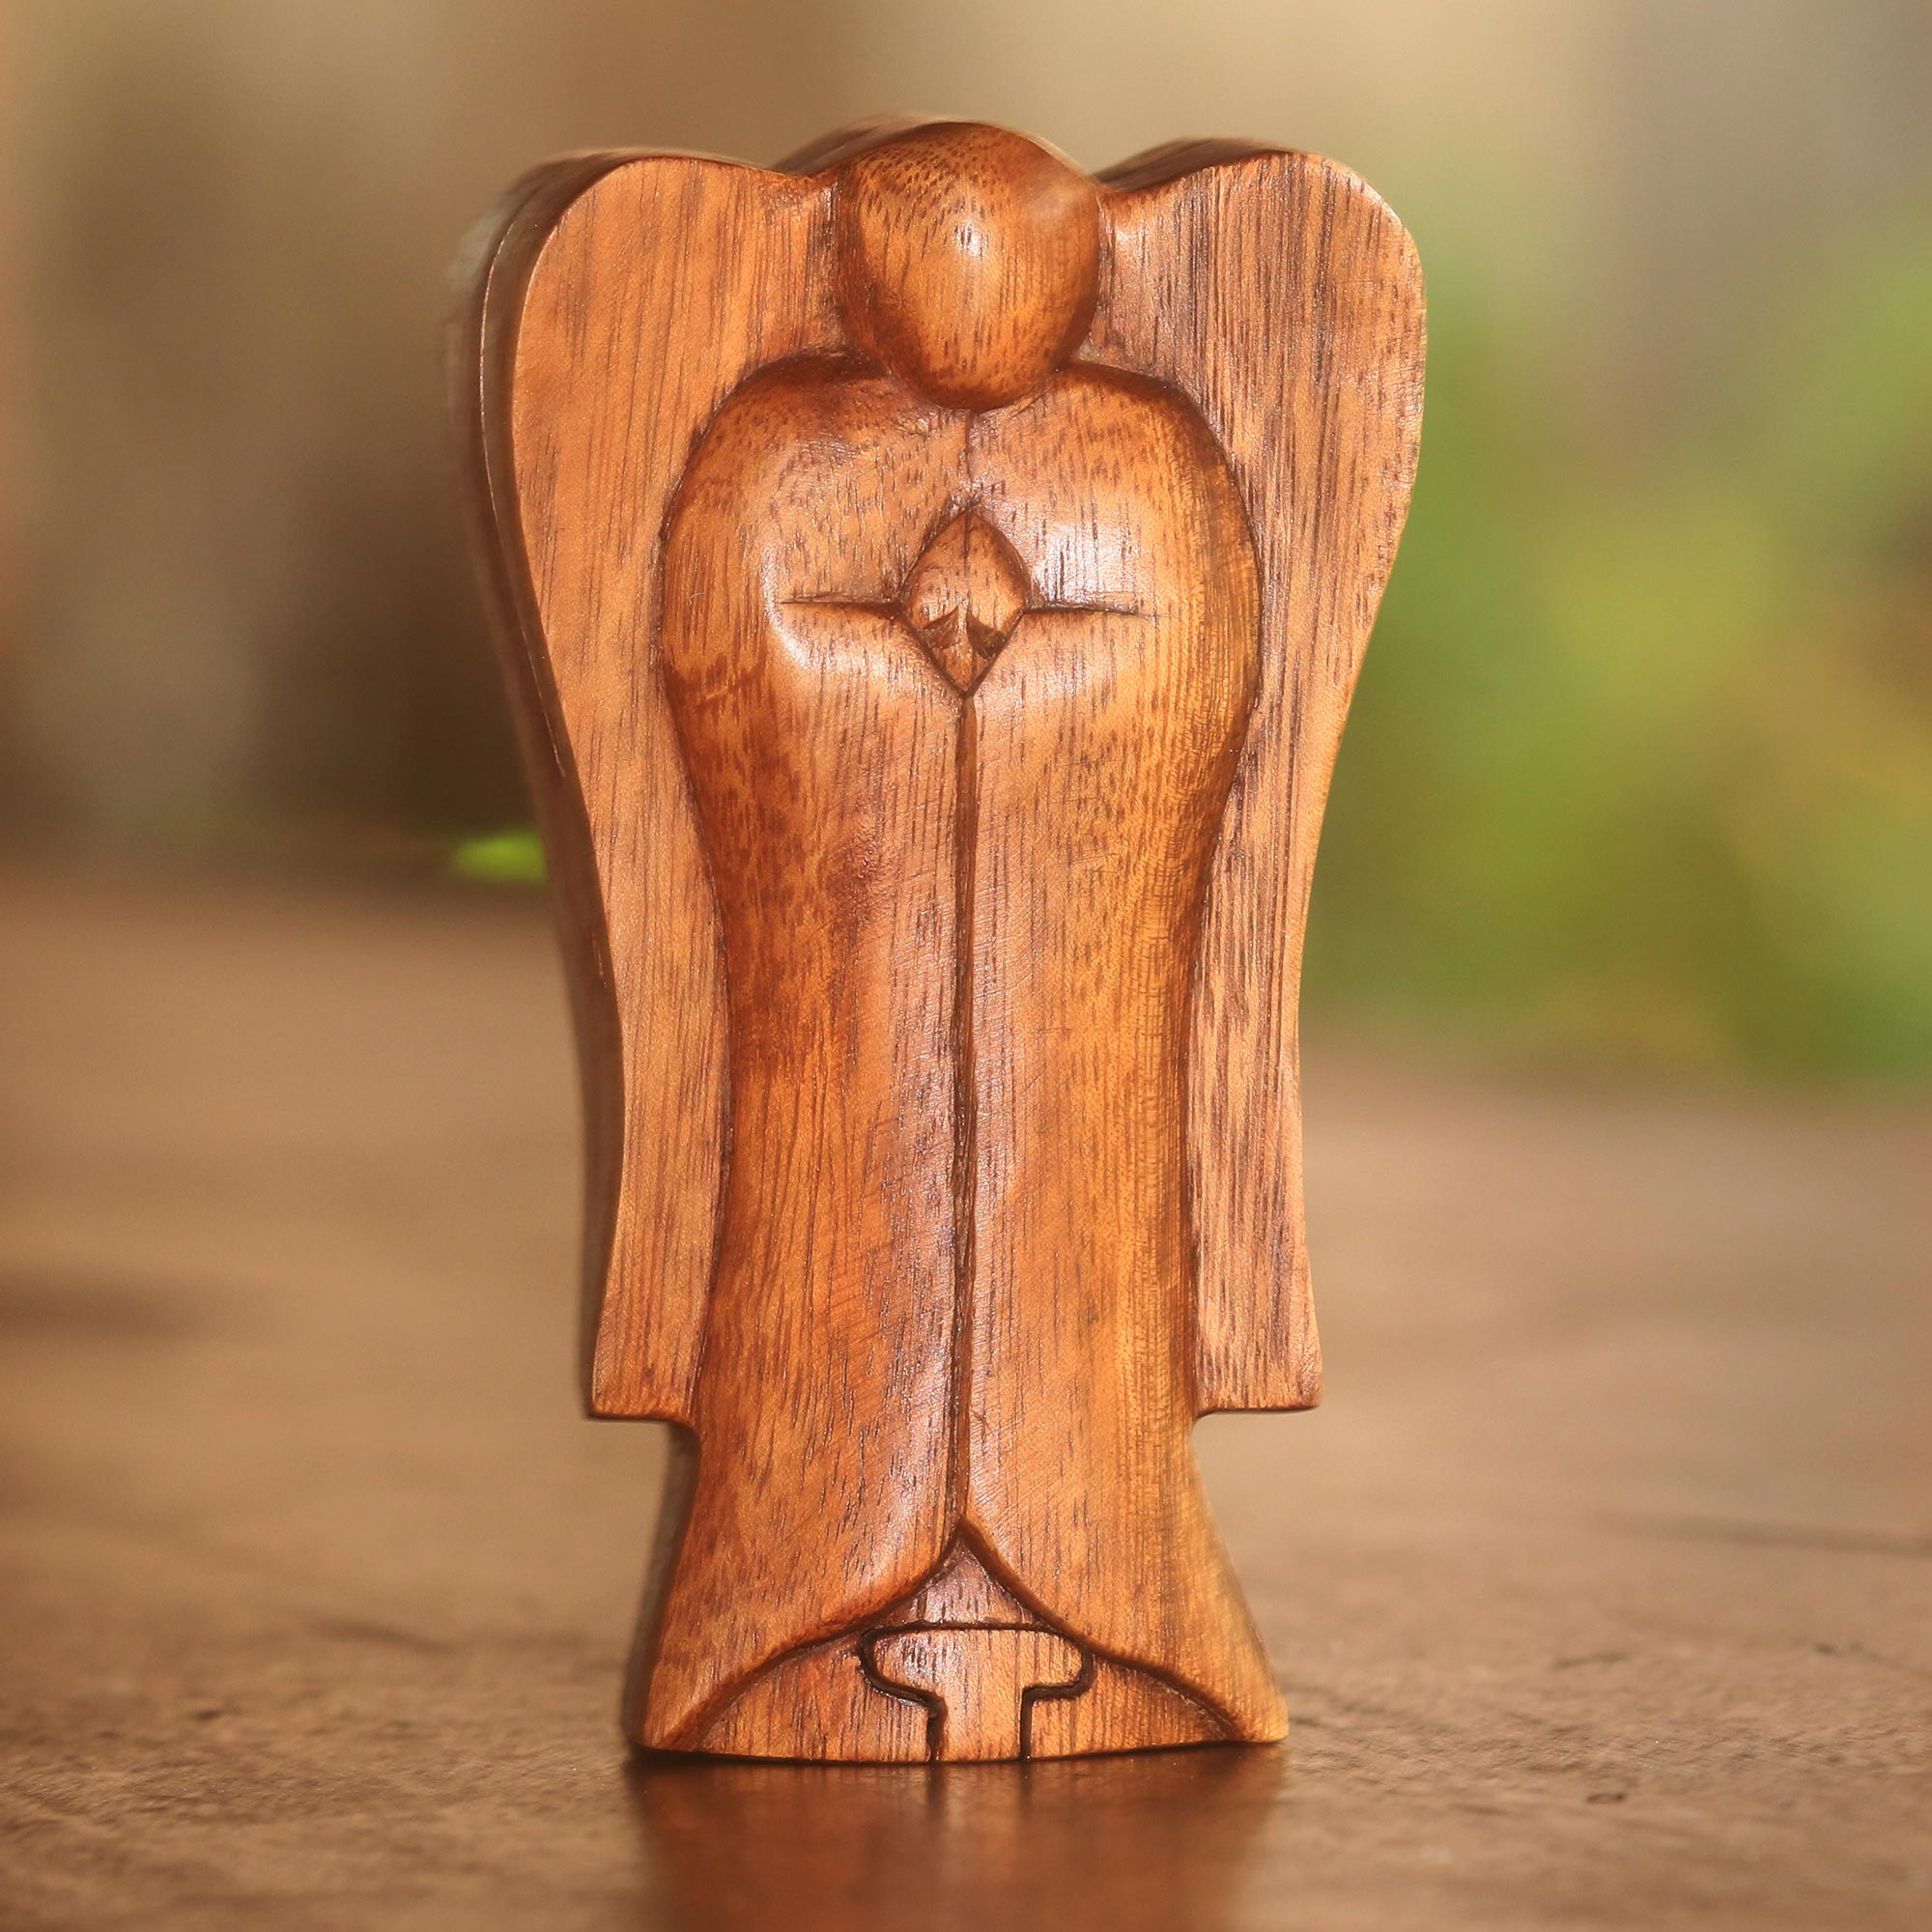 Angel Wooden Hand Carved Puzzle Box Fair Trade Trinket Box Gift